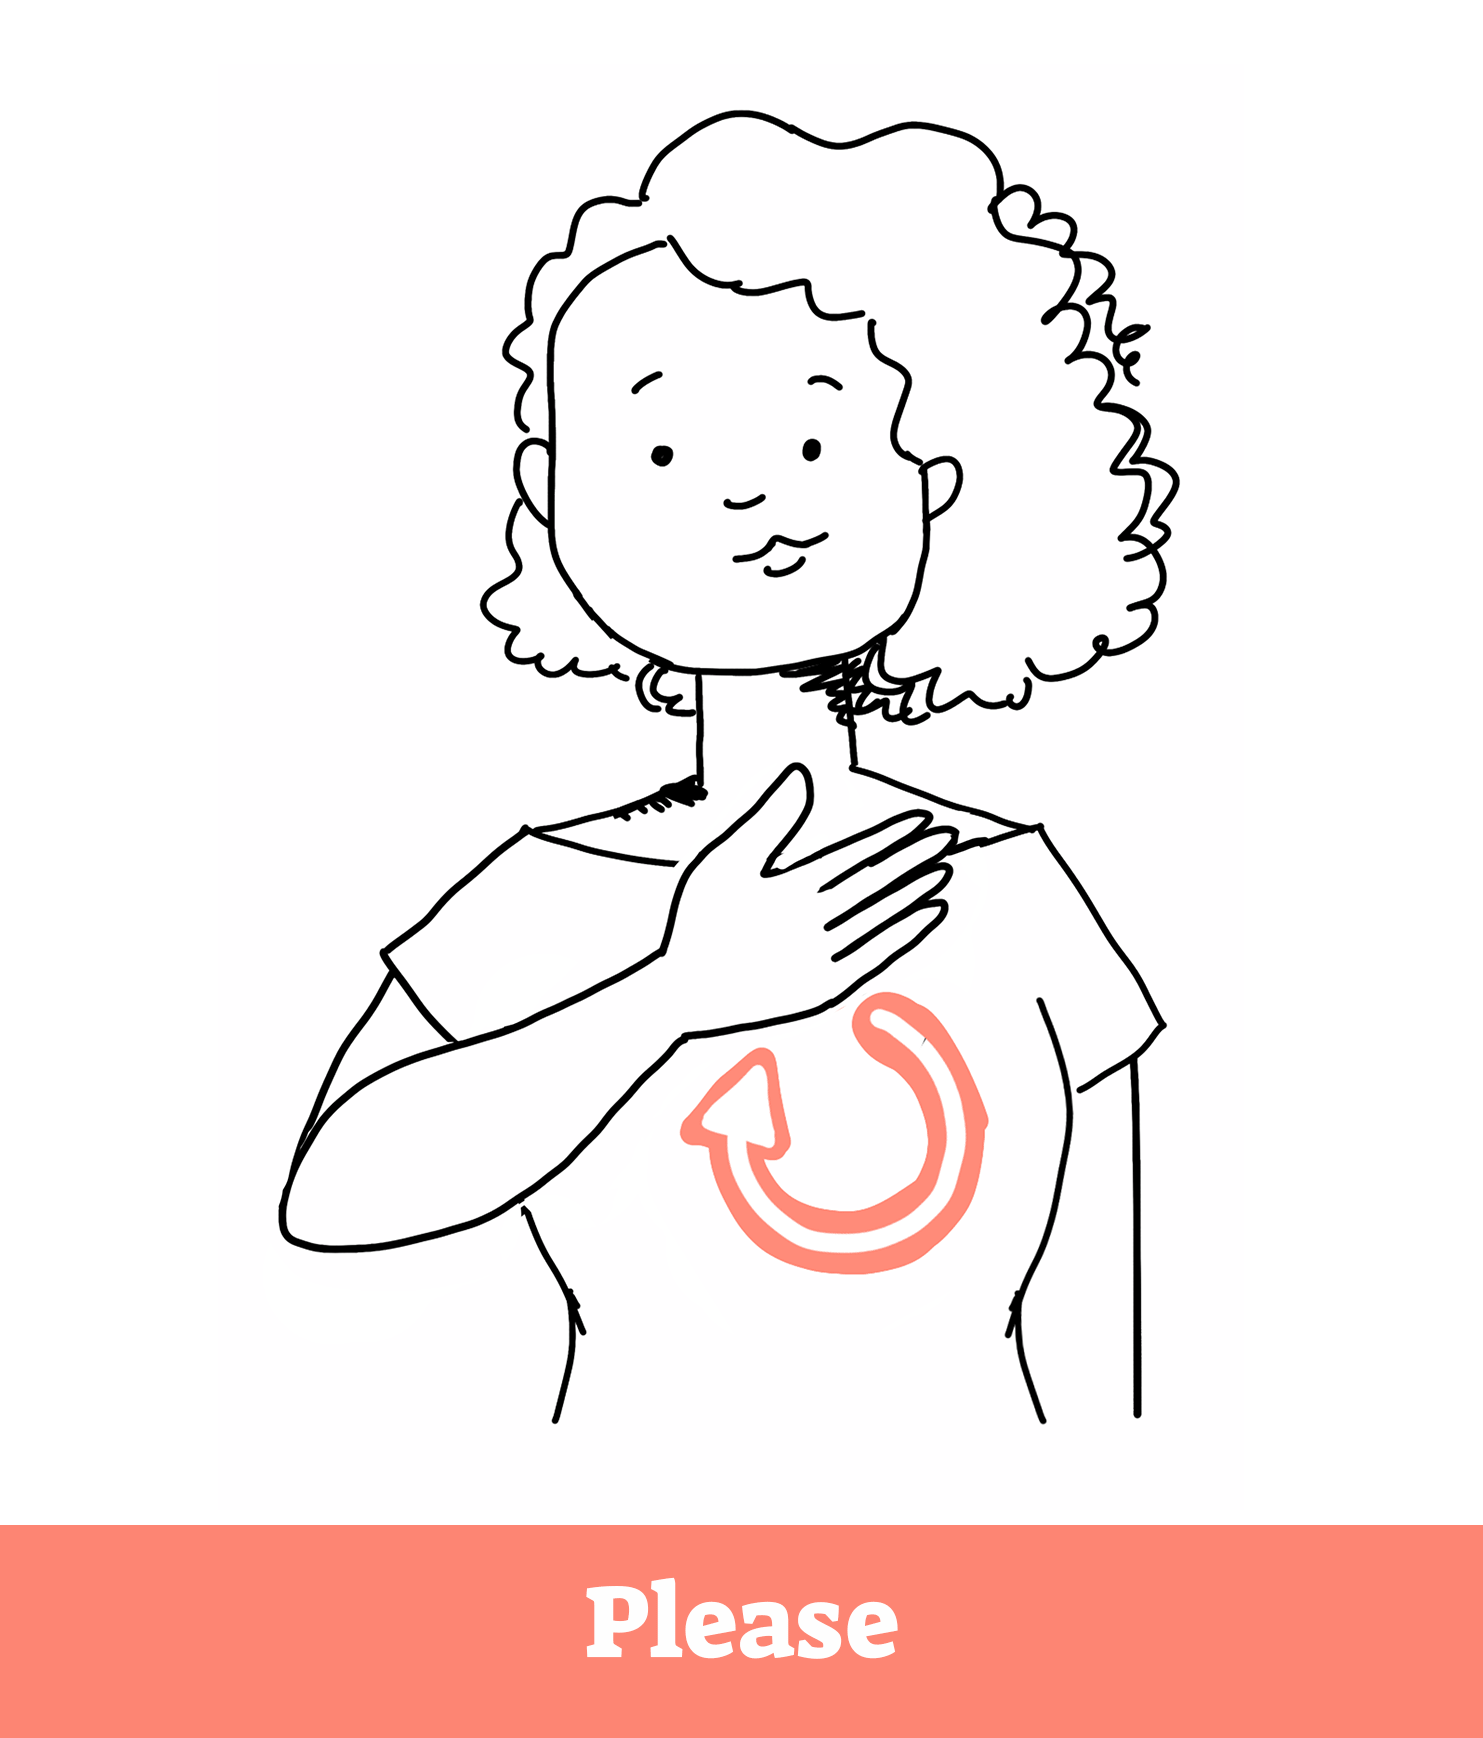 Animation of baby sign language sign for the word "please".